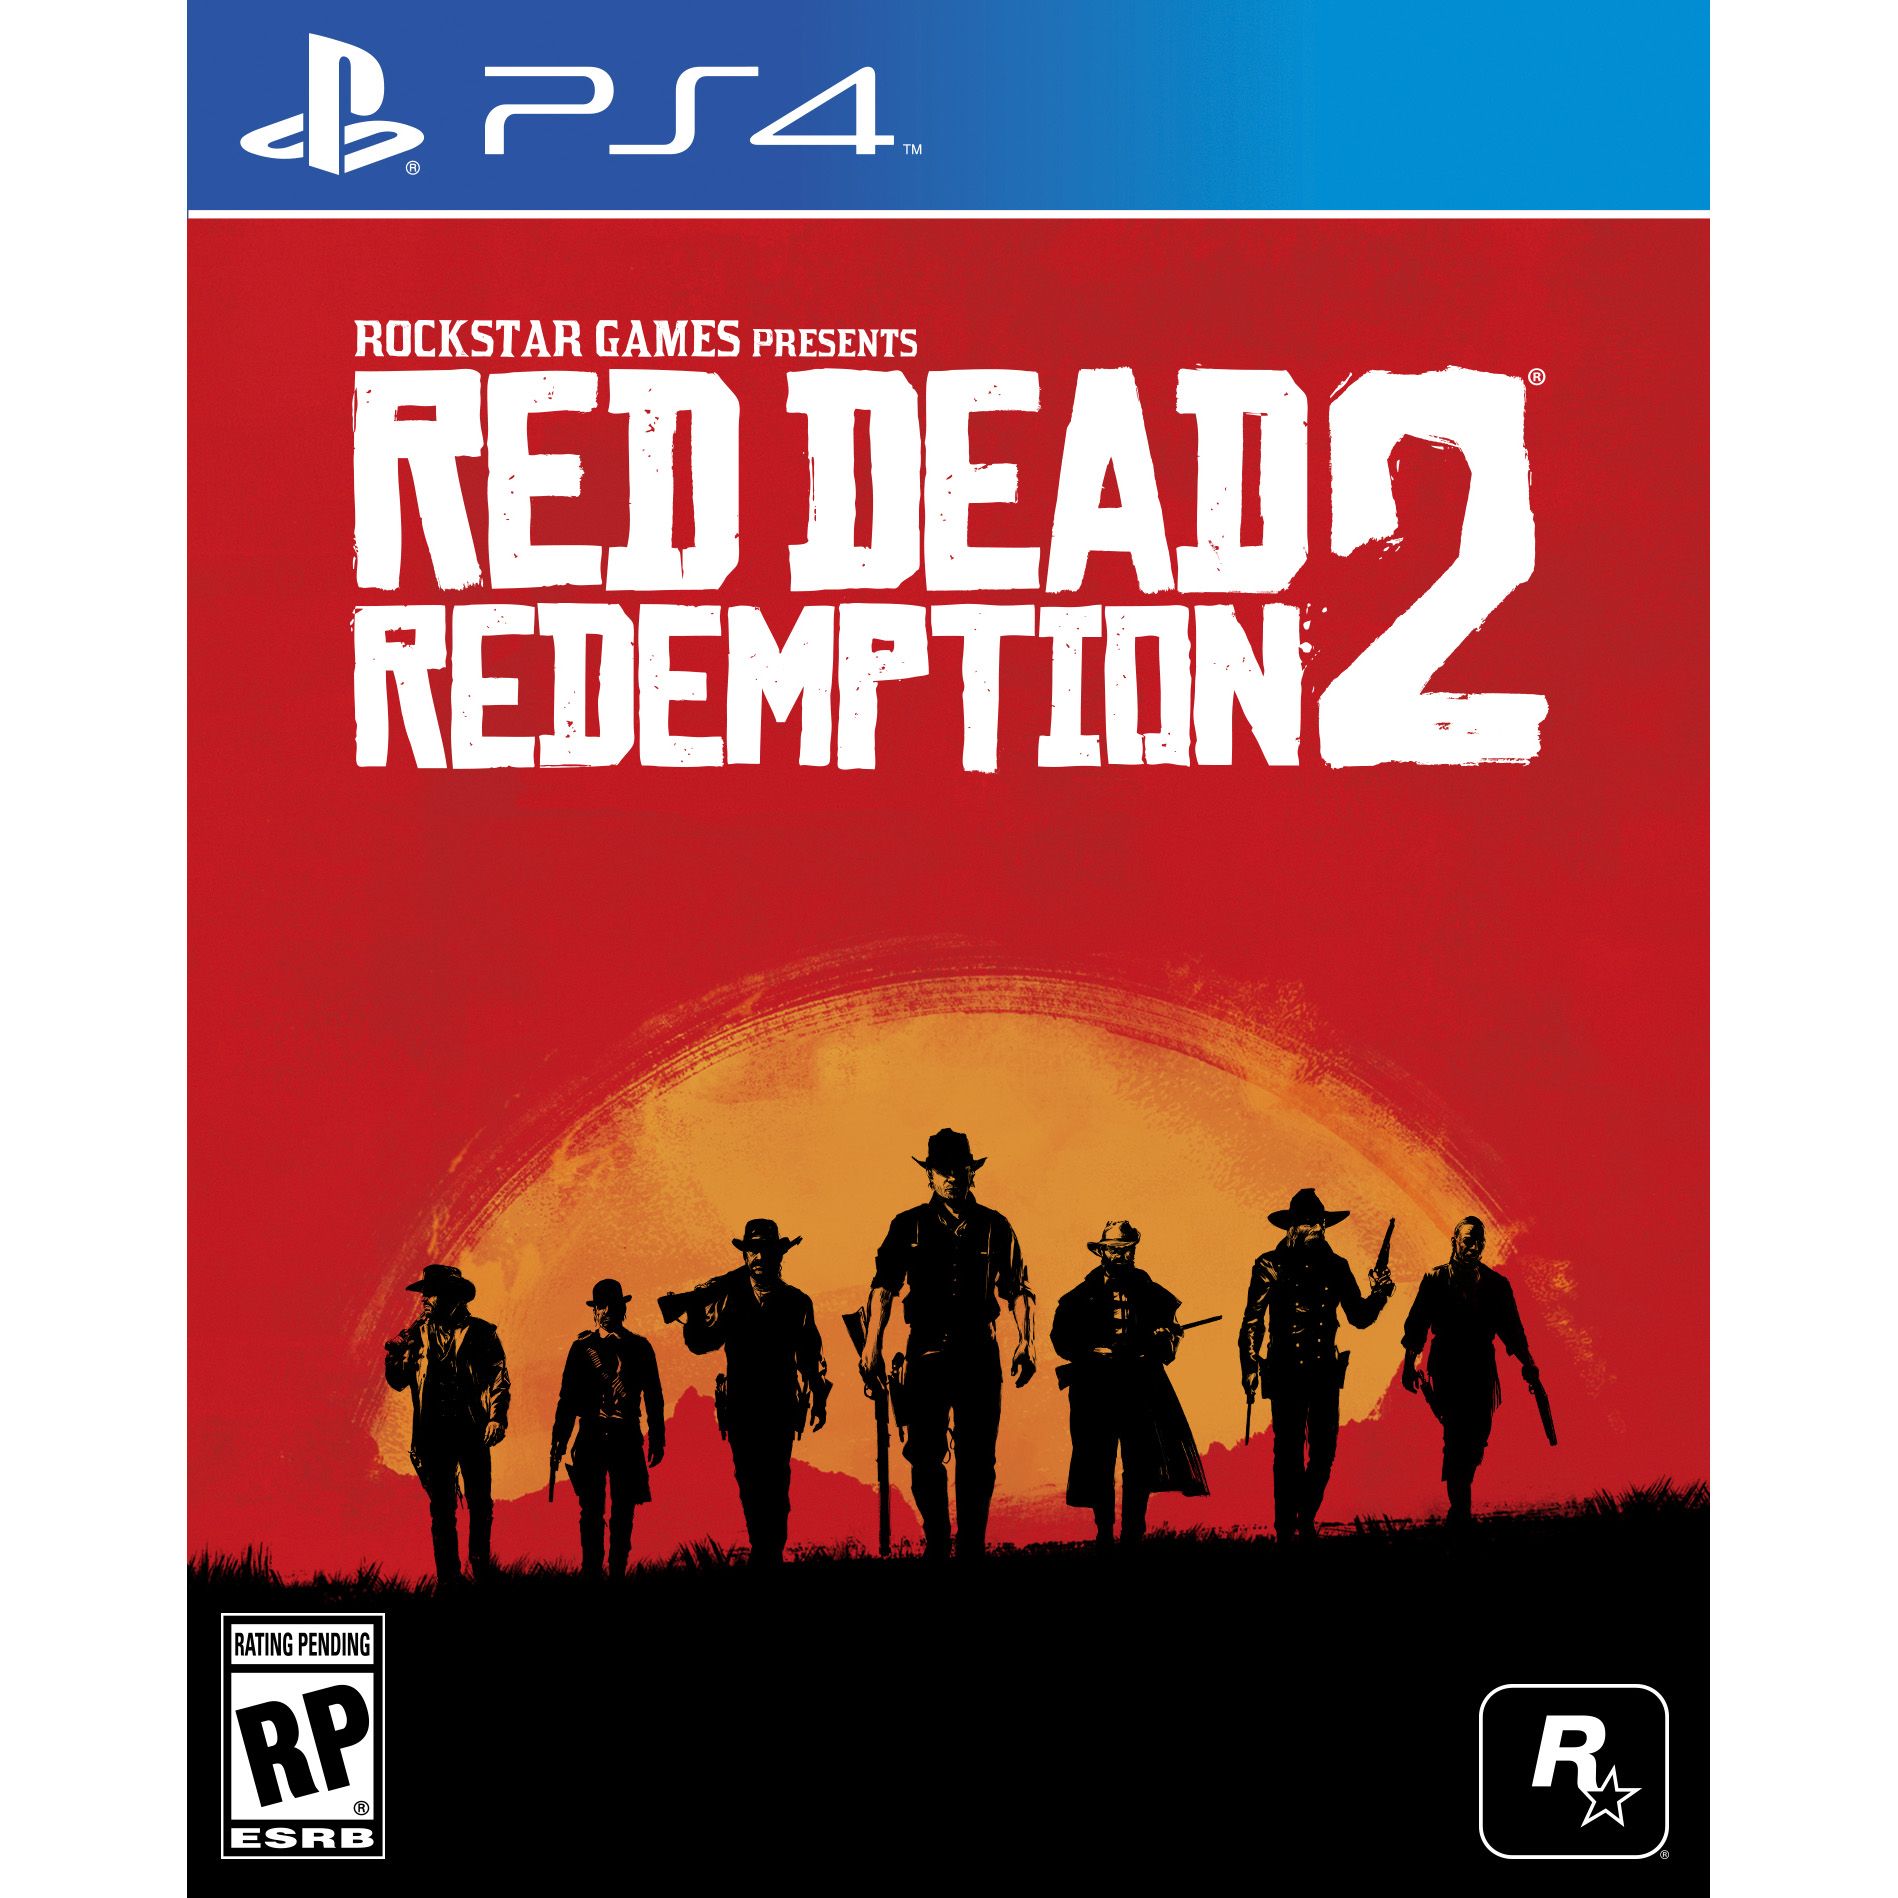 Red Dead Redemption 2 PS4 